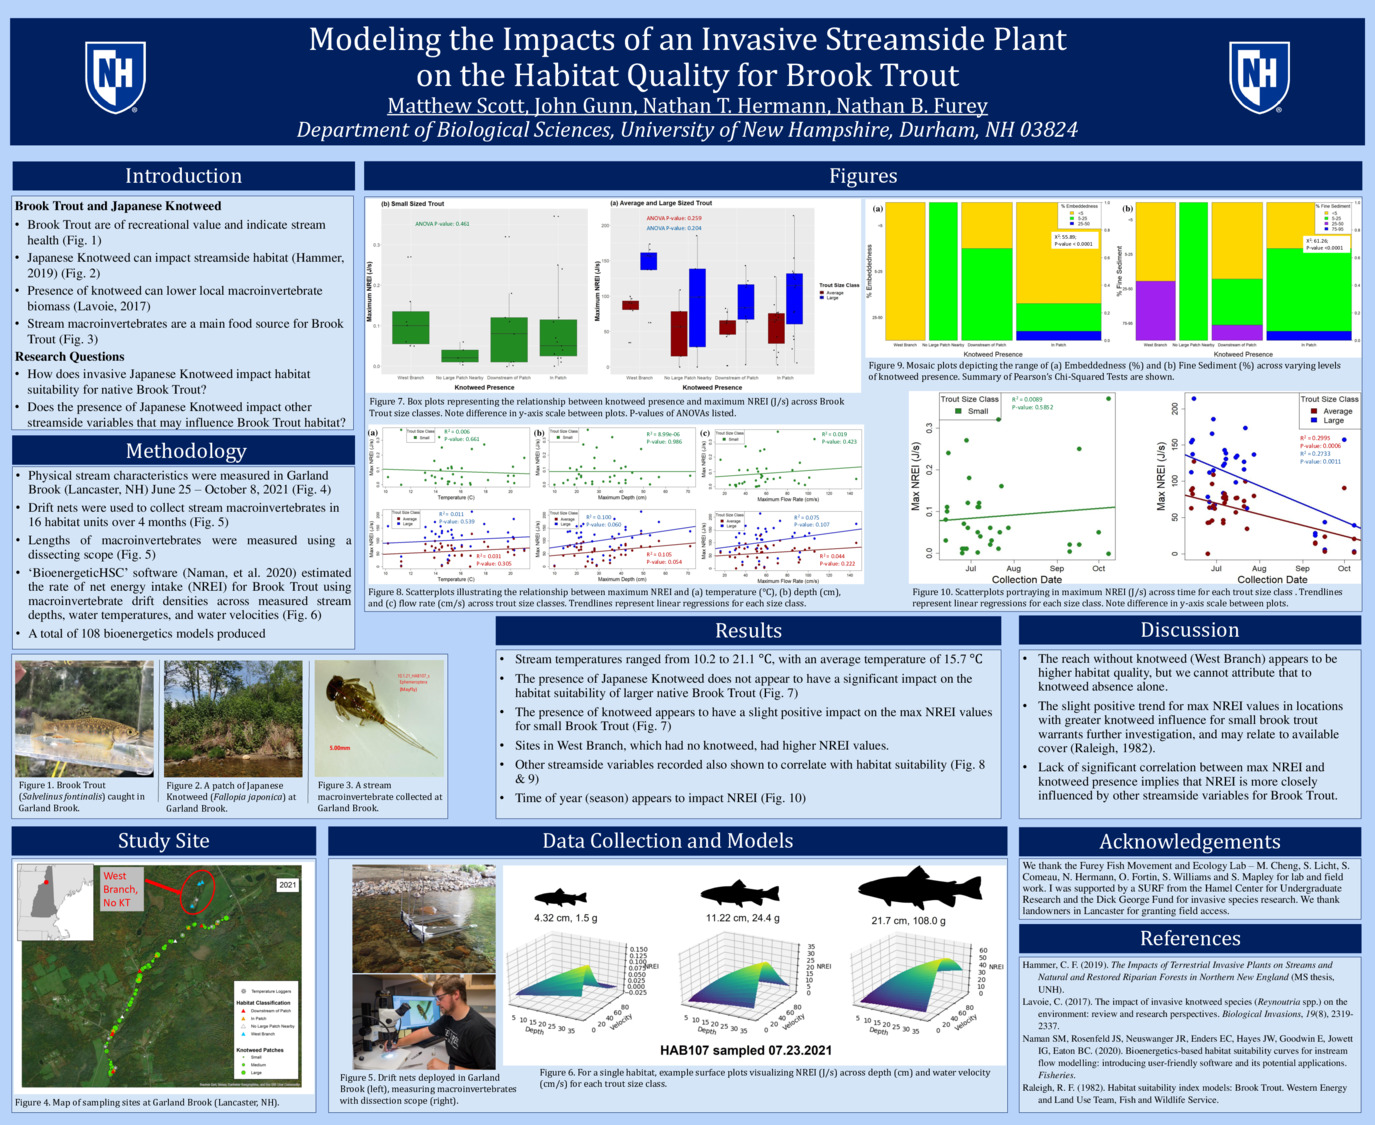 Modeling The Impacts Of An Invasive Streamside Plant On The Habitat Quality For Brook Trout by mjs1160